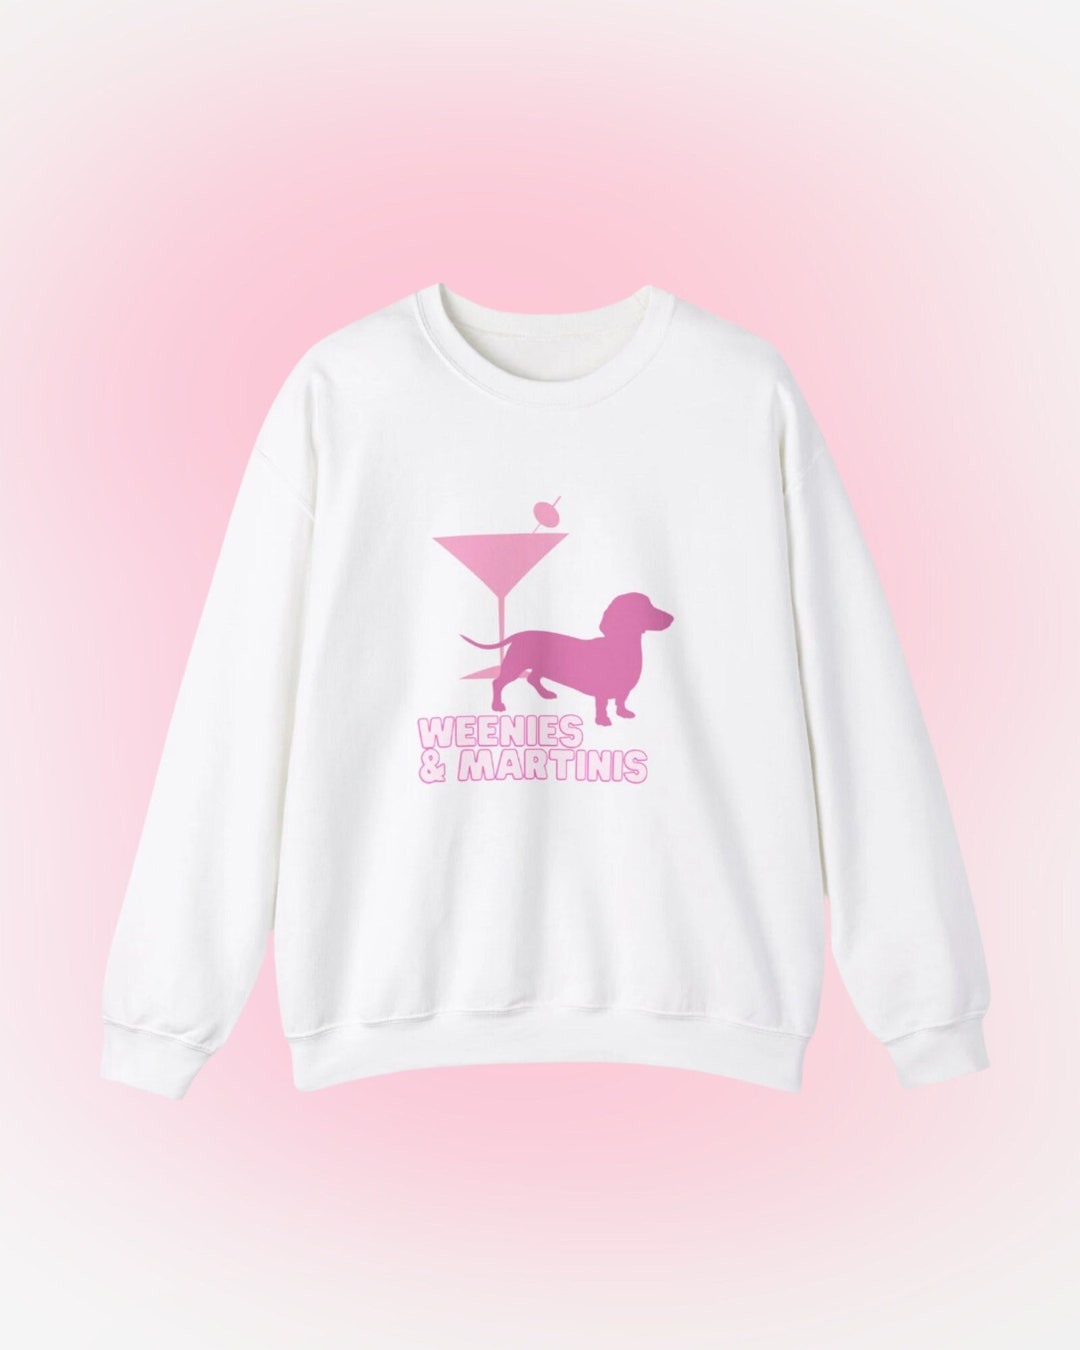 Dachshund Lover Crewneck, Weenies and Martinis, Funny Dog Lover ...